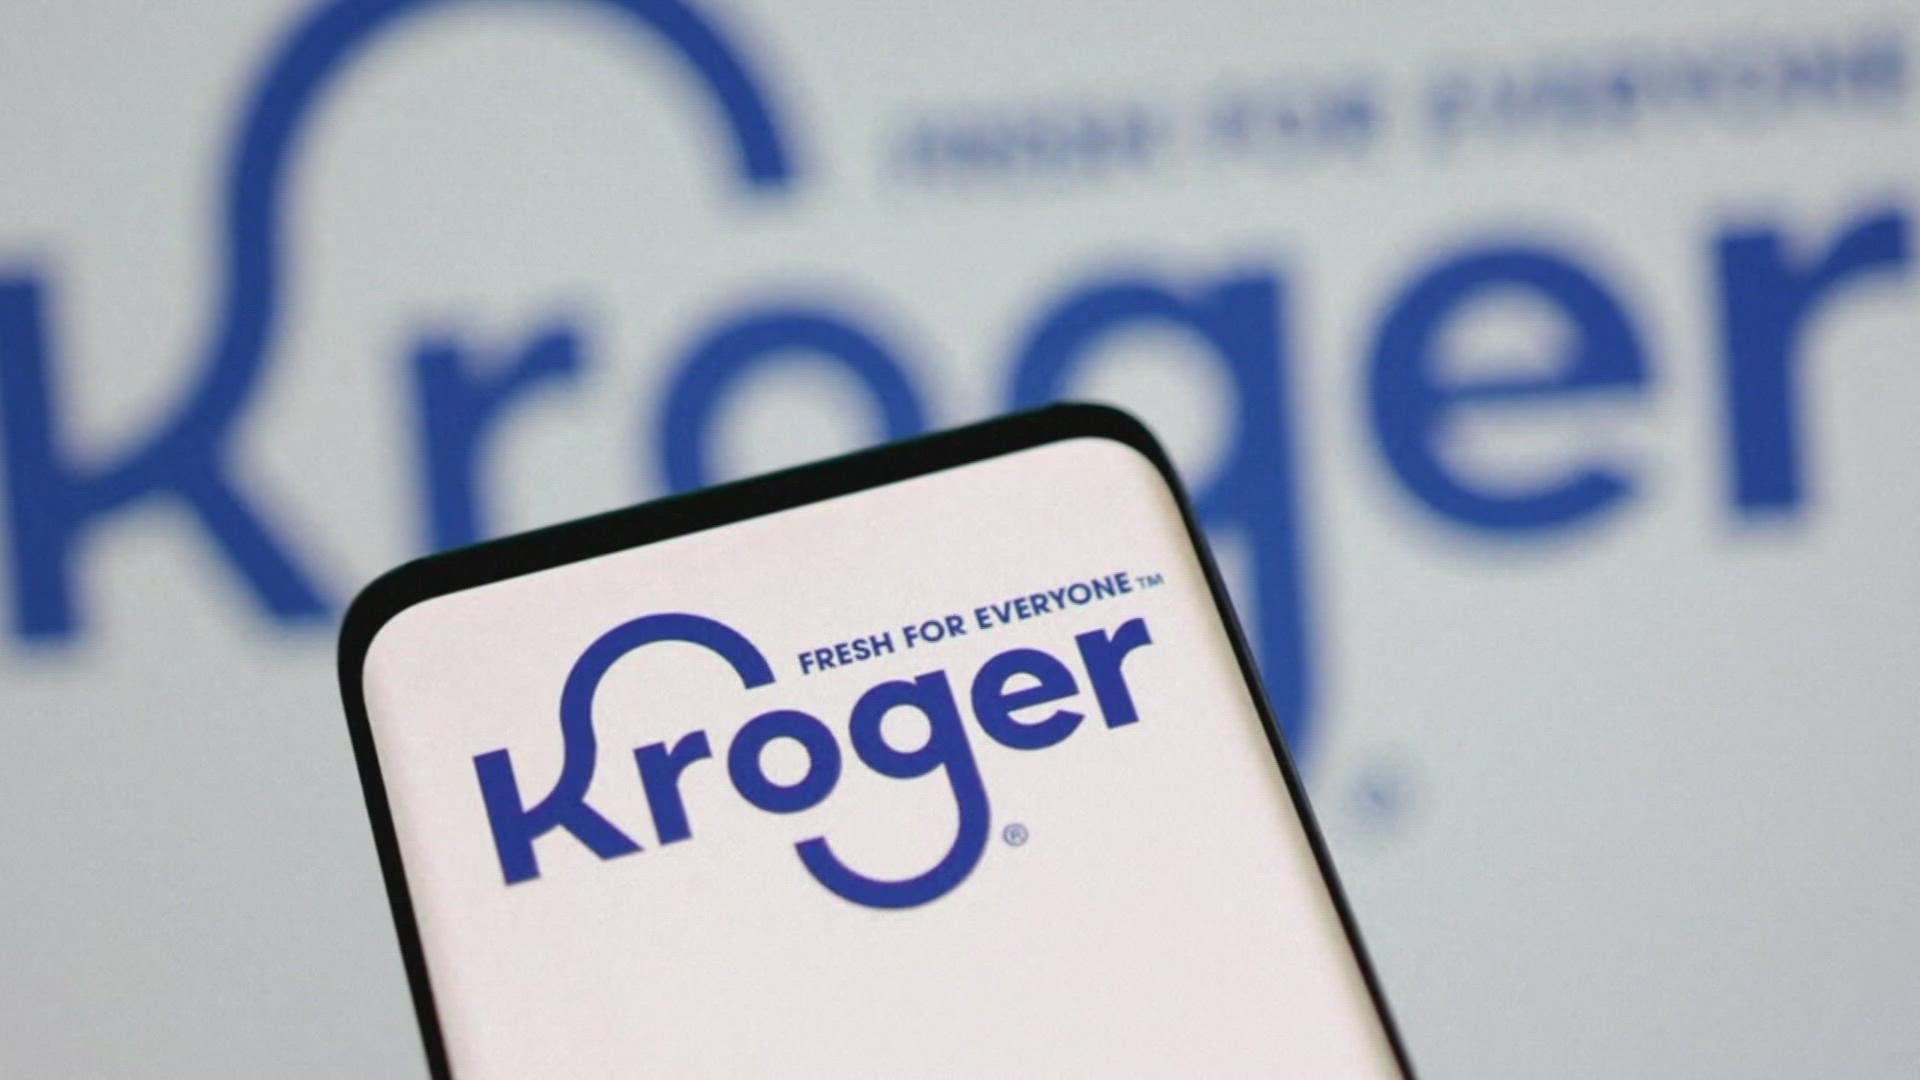 A major merger of the two biggest grocers in the U.S. has been confirmed by Kroger.